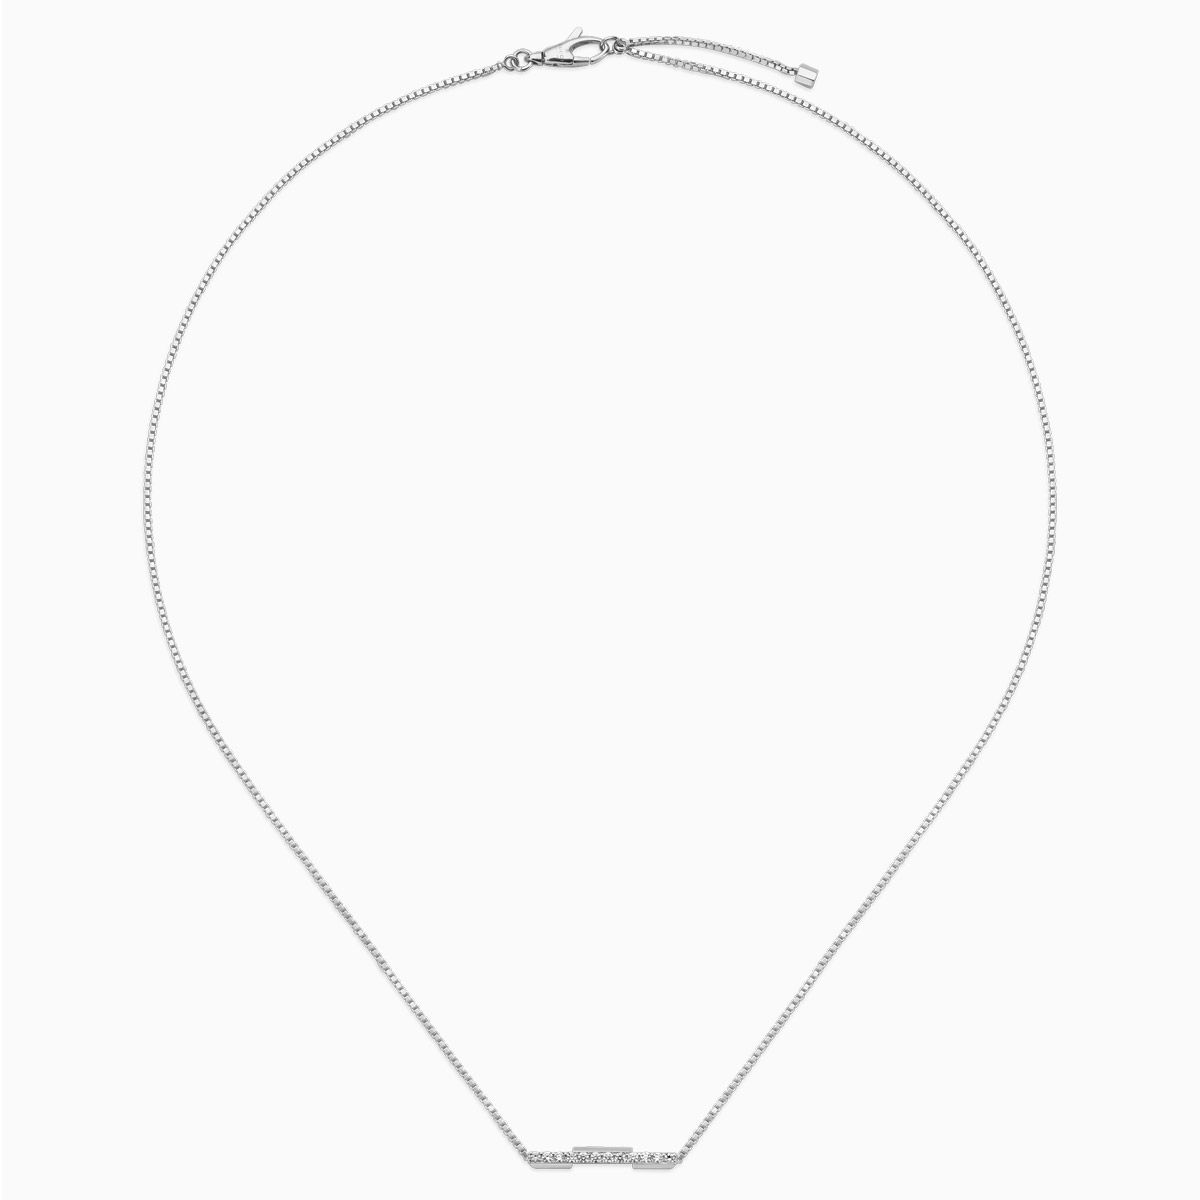 Necklace Gucci Link to Love white gold and diamonds